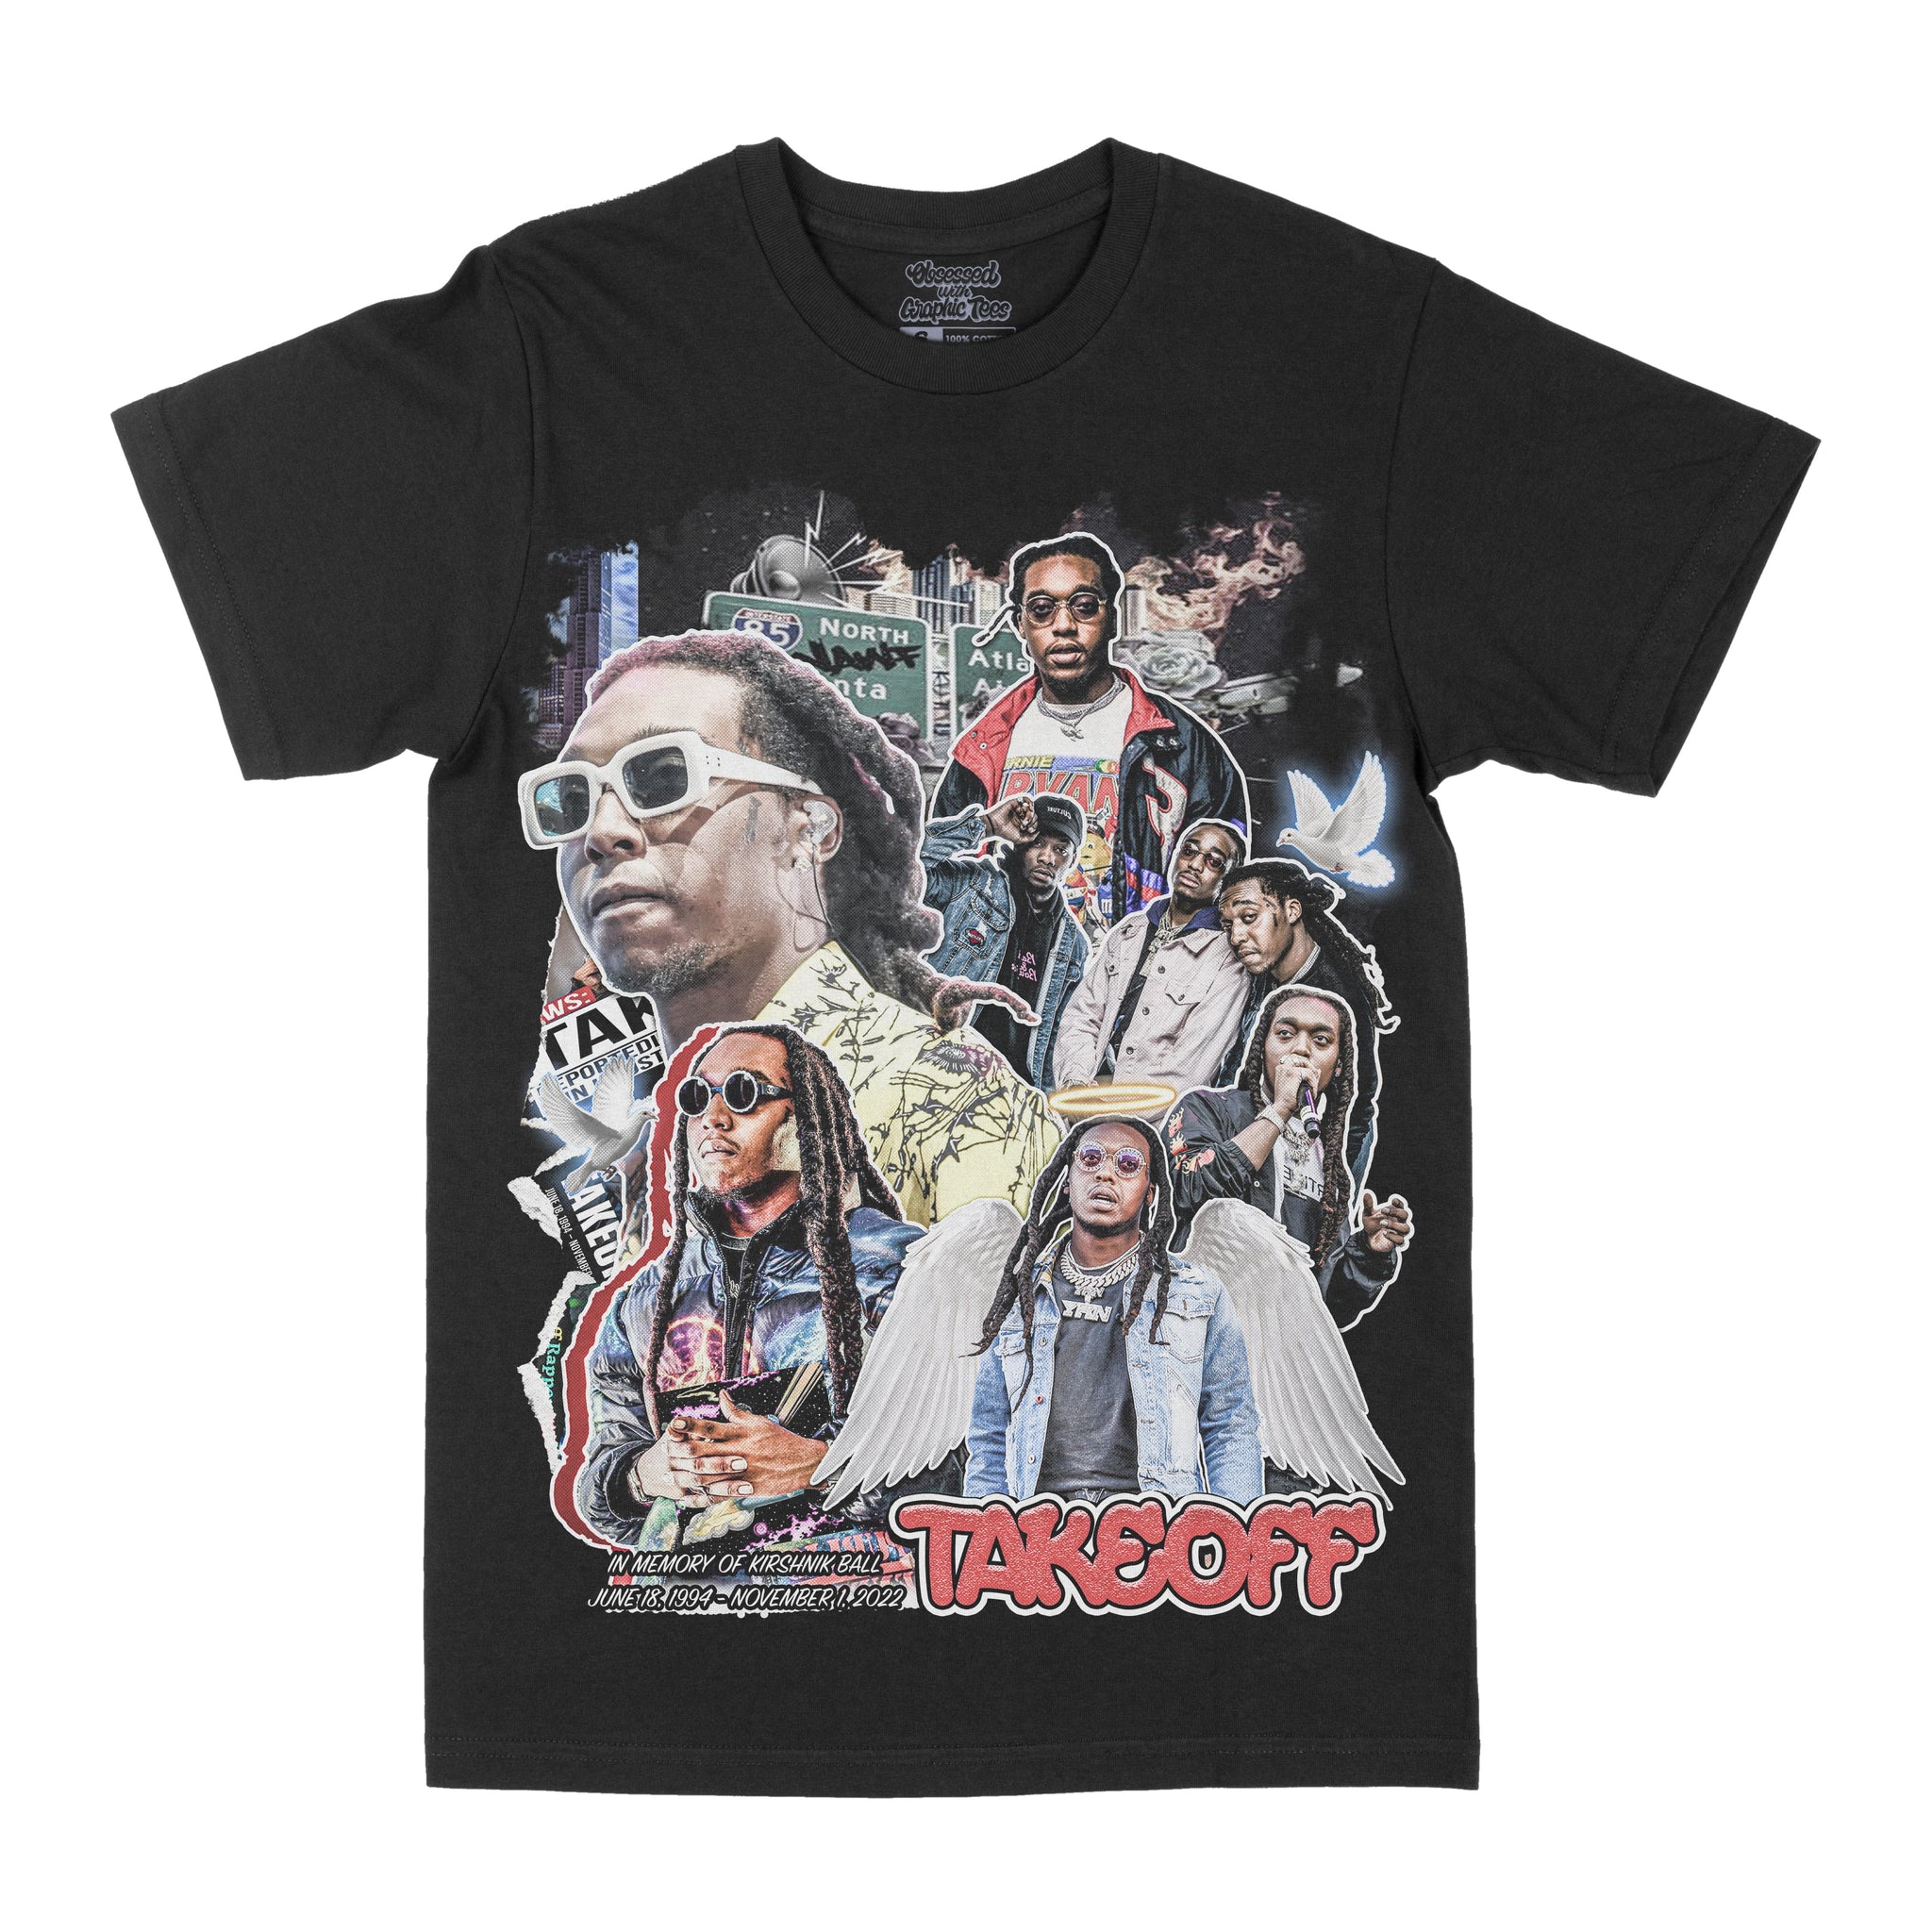 Takeoff "Dates" Graphic Tee